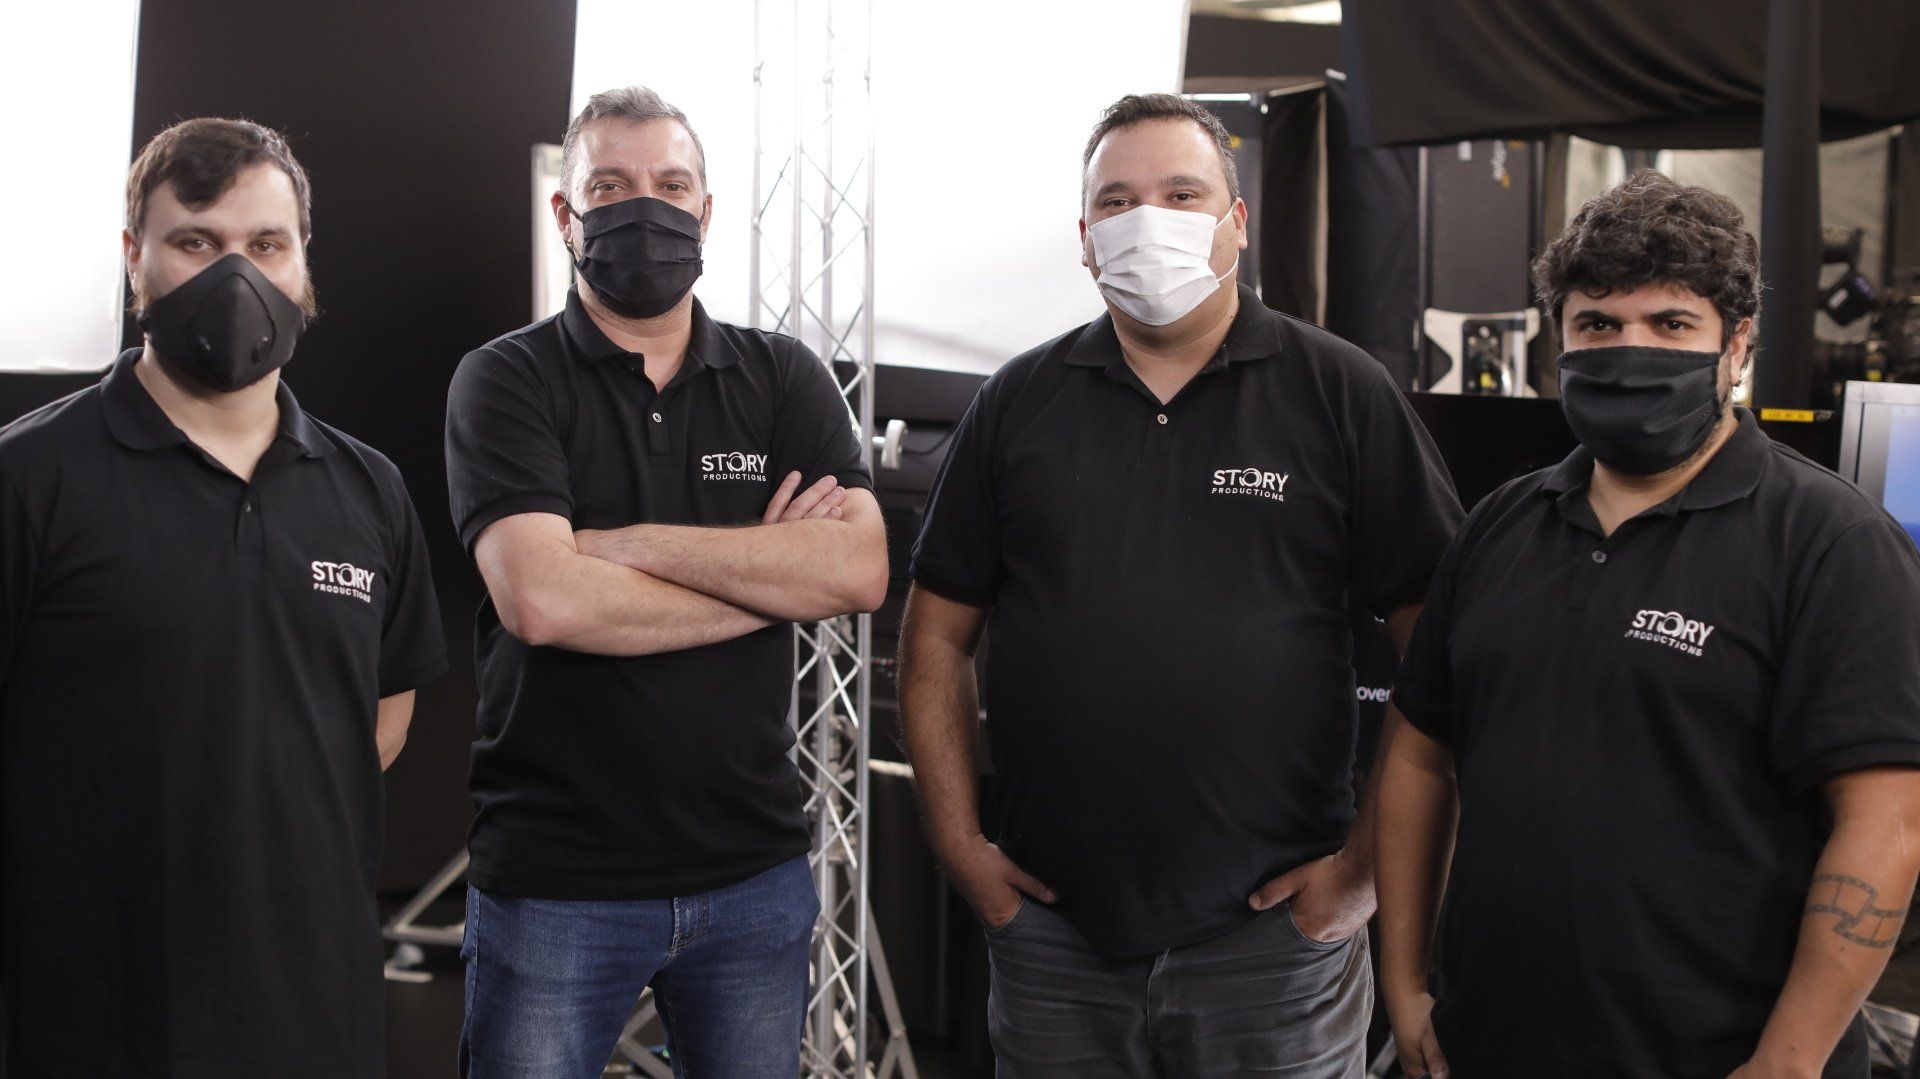 The Story Productions crew on location wearing face masks